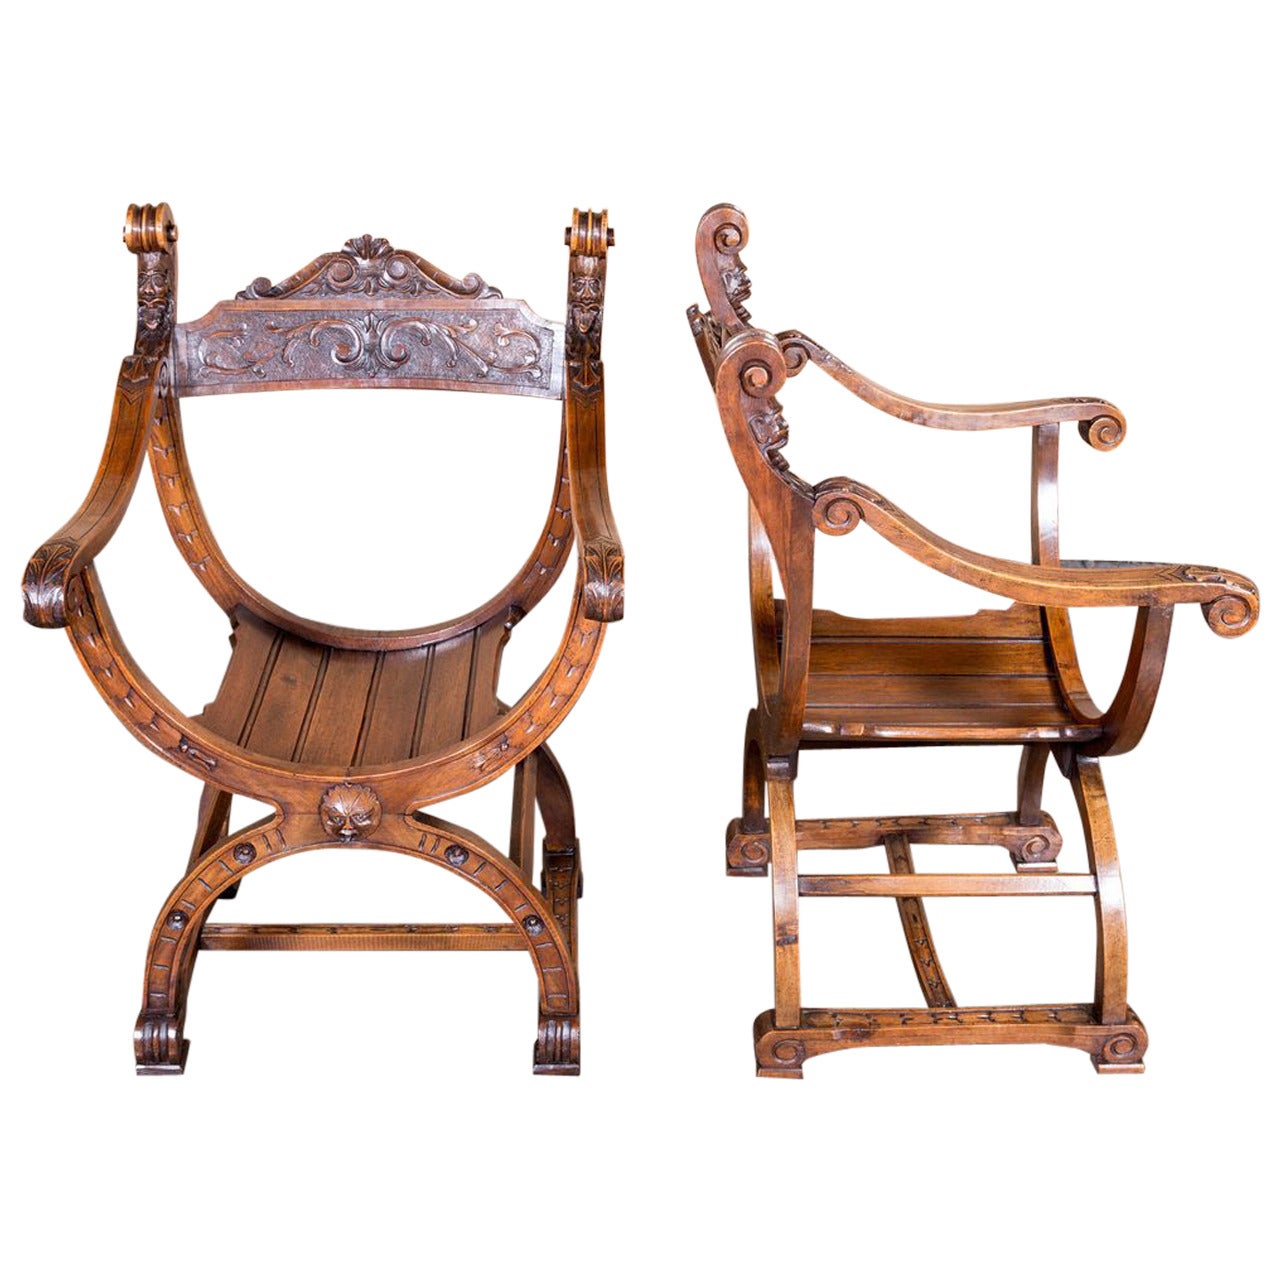 Pair of French Renaissance Style Dagobert or Curule Chairs